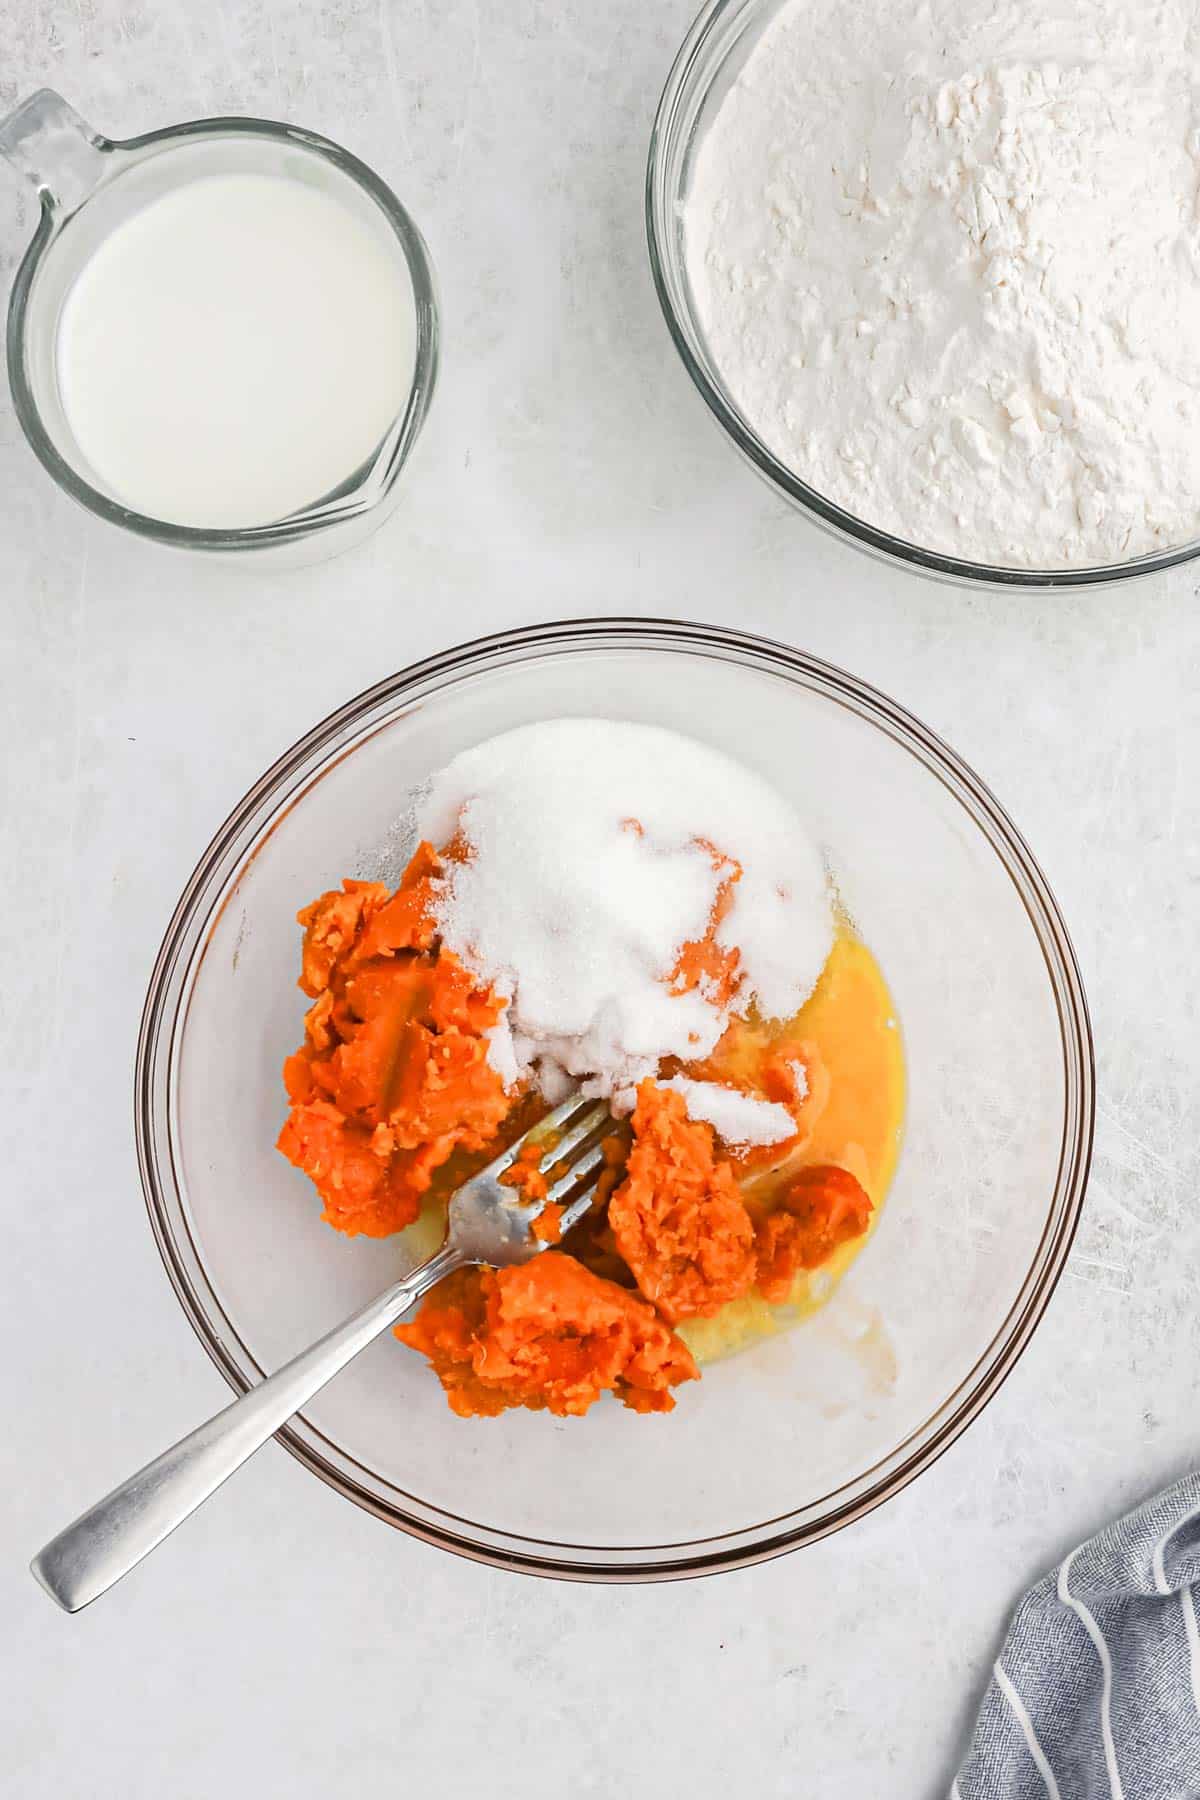 Sweet potato, egg and sugar in a mixing bowl with a fork.